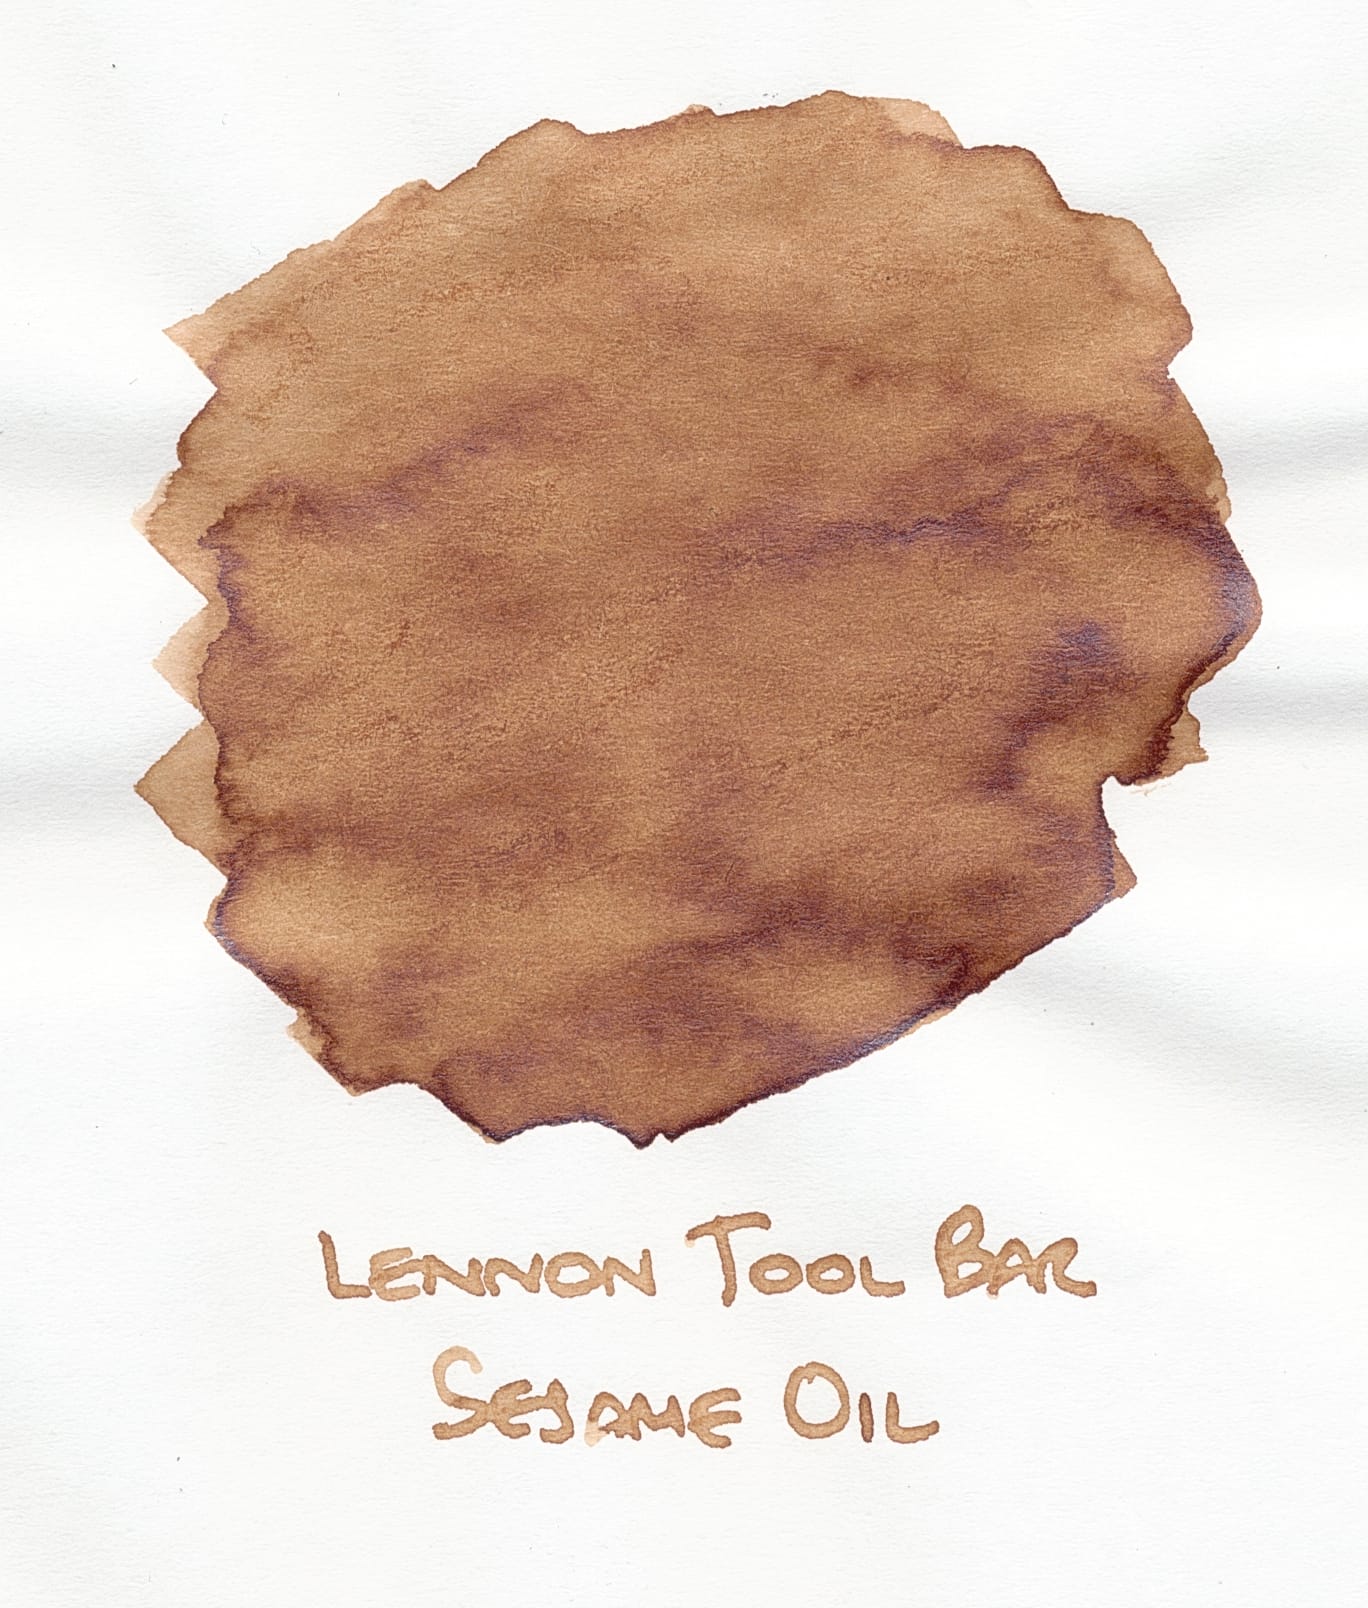 Swatch of a medium light brown ink with visible shading in areas where more of the ink pooled around the edges, a label of "Lennon Tool Bar Sesame Oil" written underneath